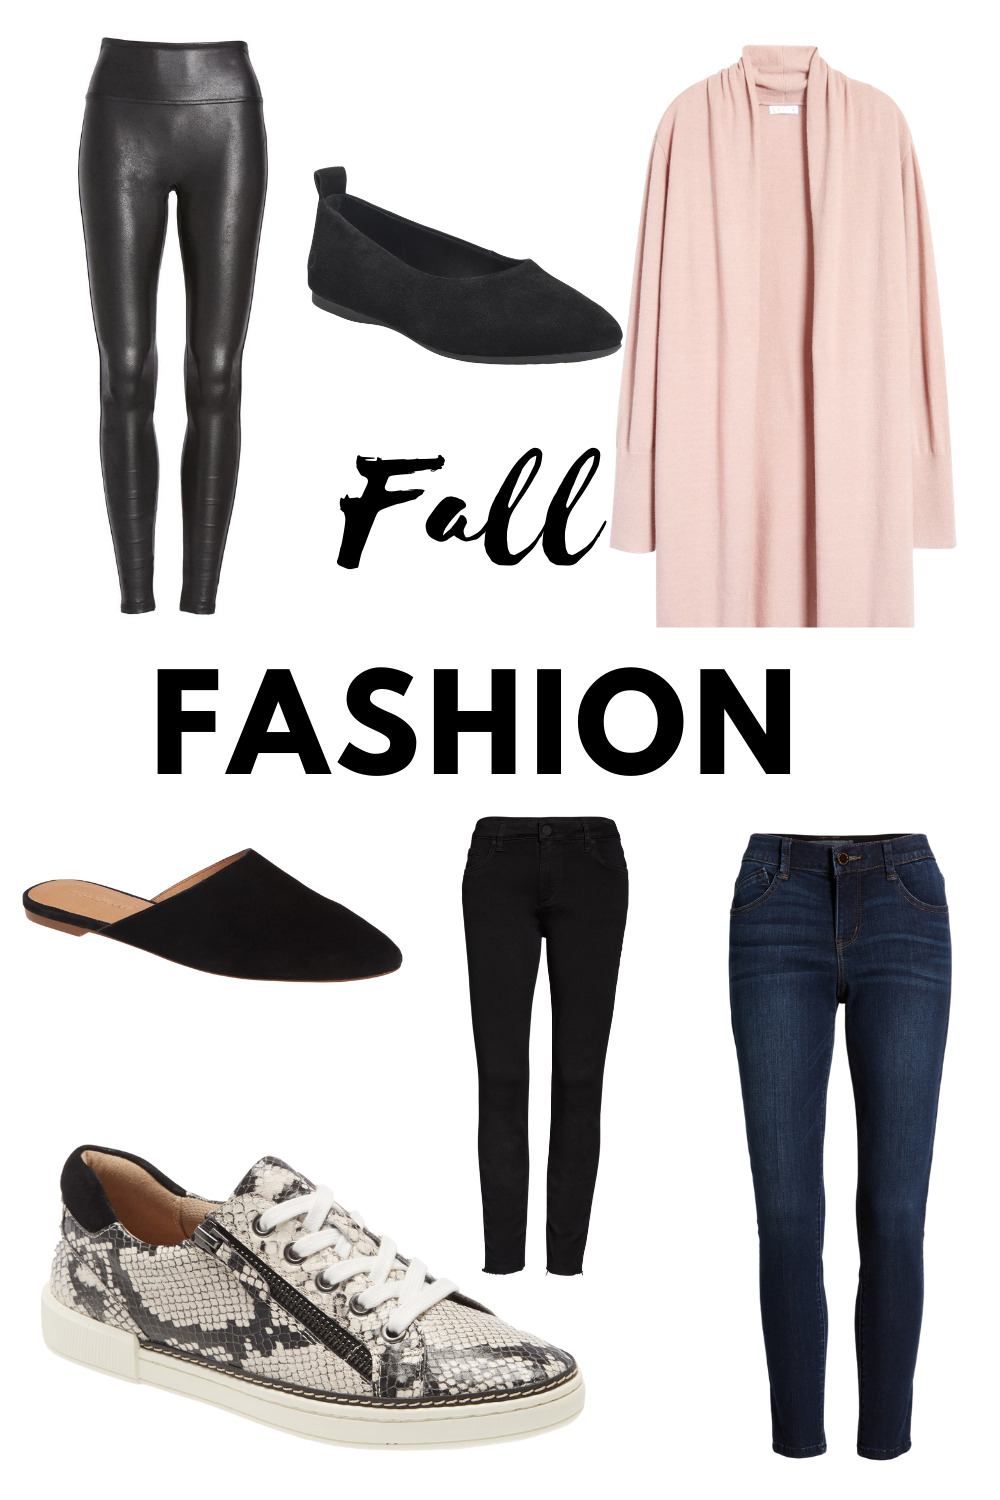 graphic collage of fall fashion ideas for women